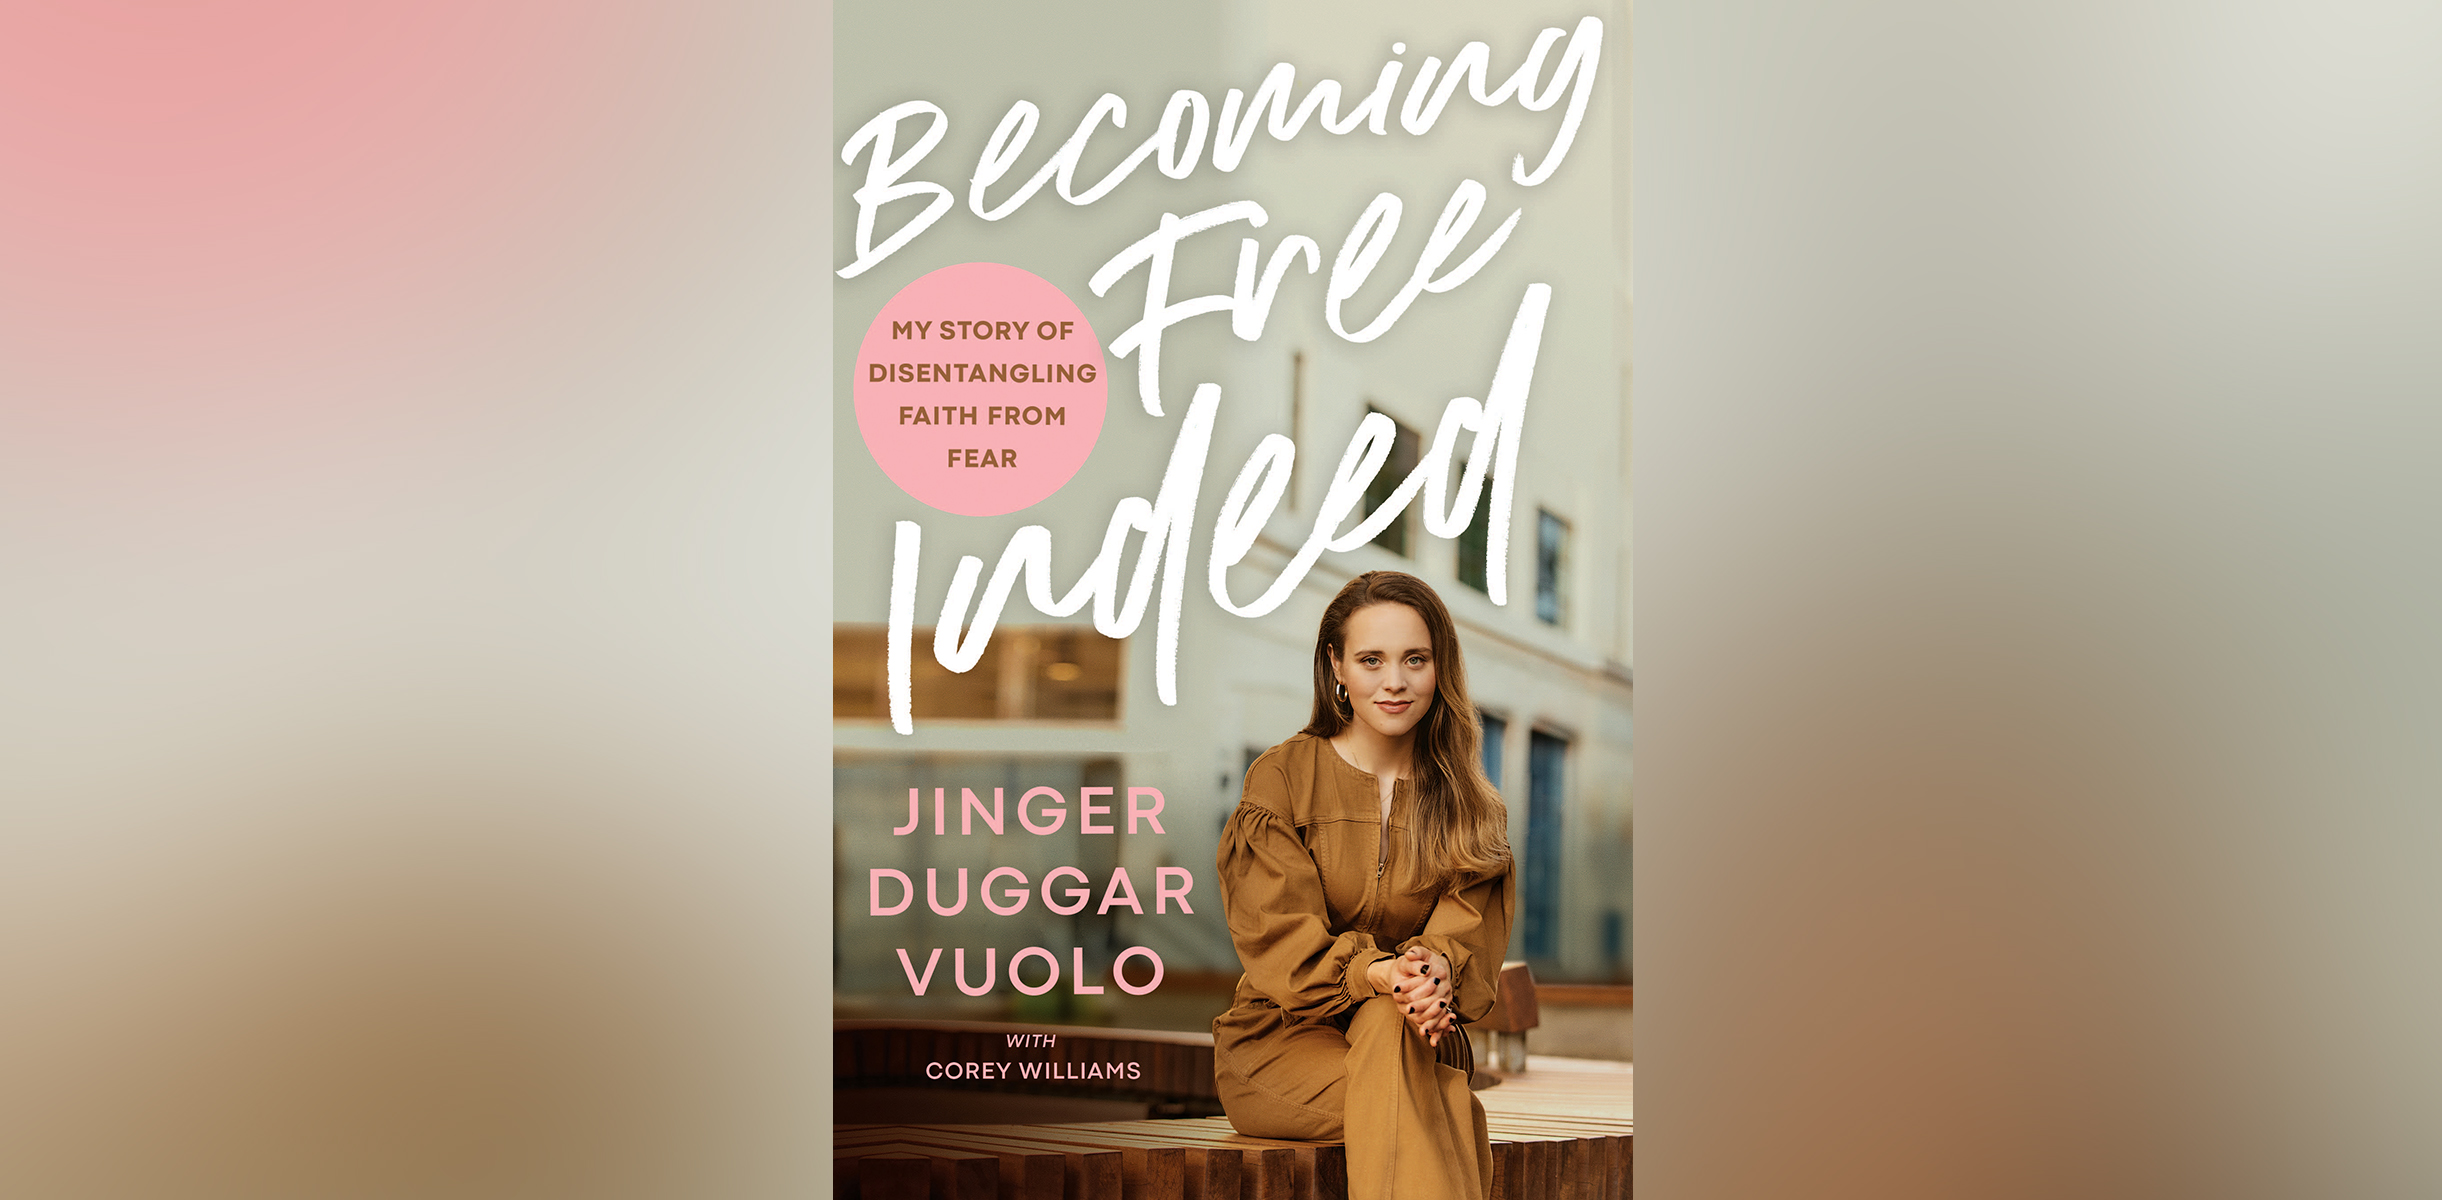 PHOTO: The cover of the book, "Becoming Free Indeed - My story of disentangling faith from fear," by Jinger Duggar Vuolo